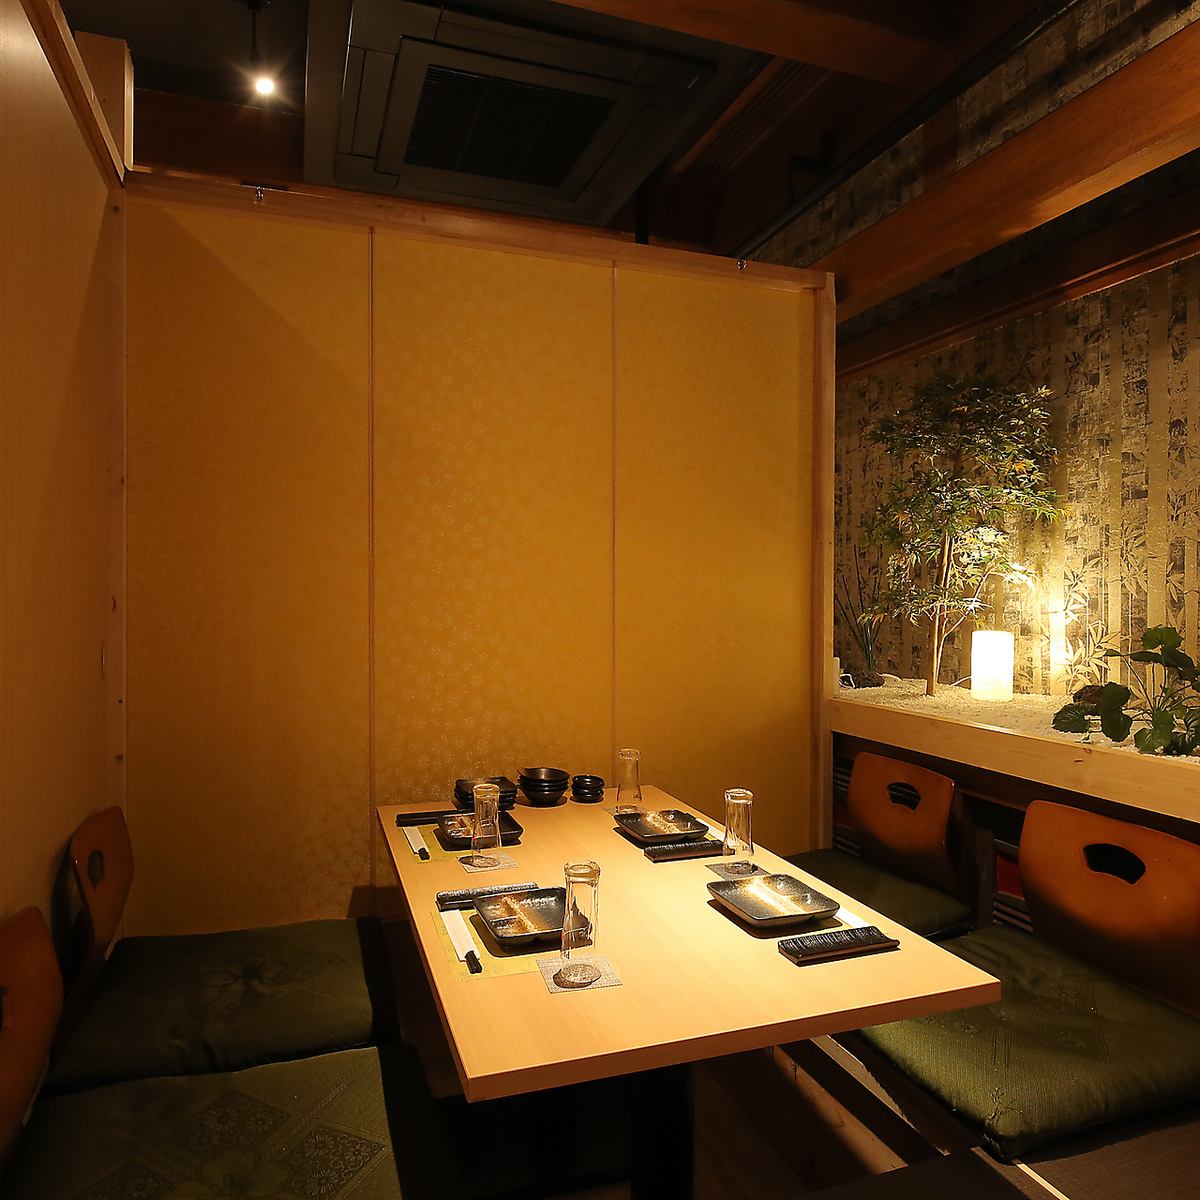 You can enjoy your meal in a completely Japanese private room that can accommodate up to 2 people.